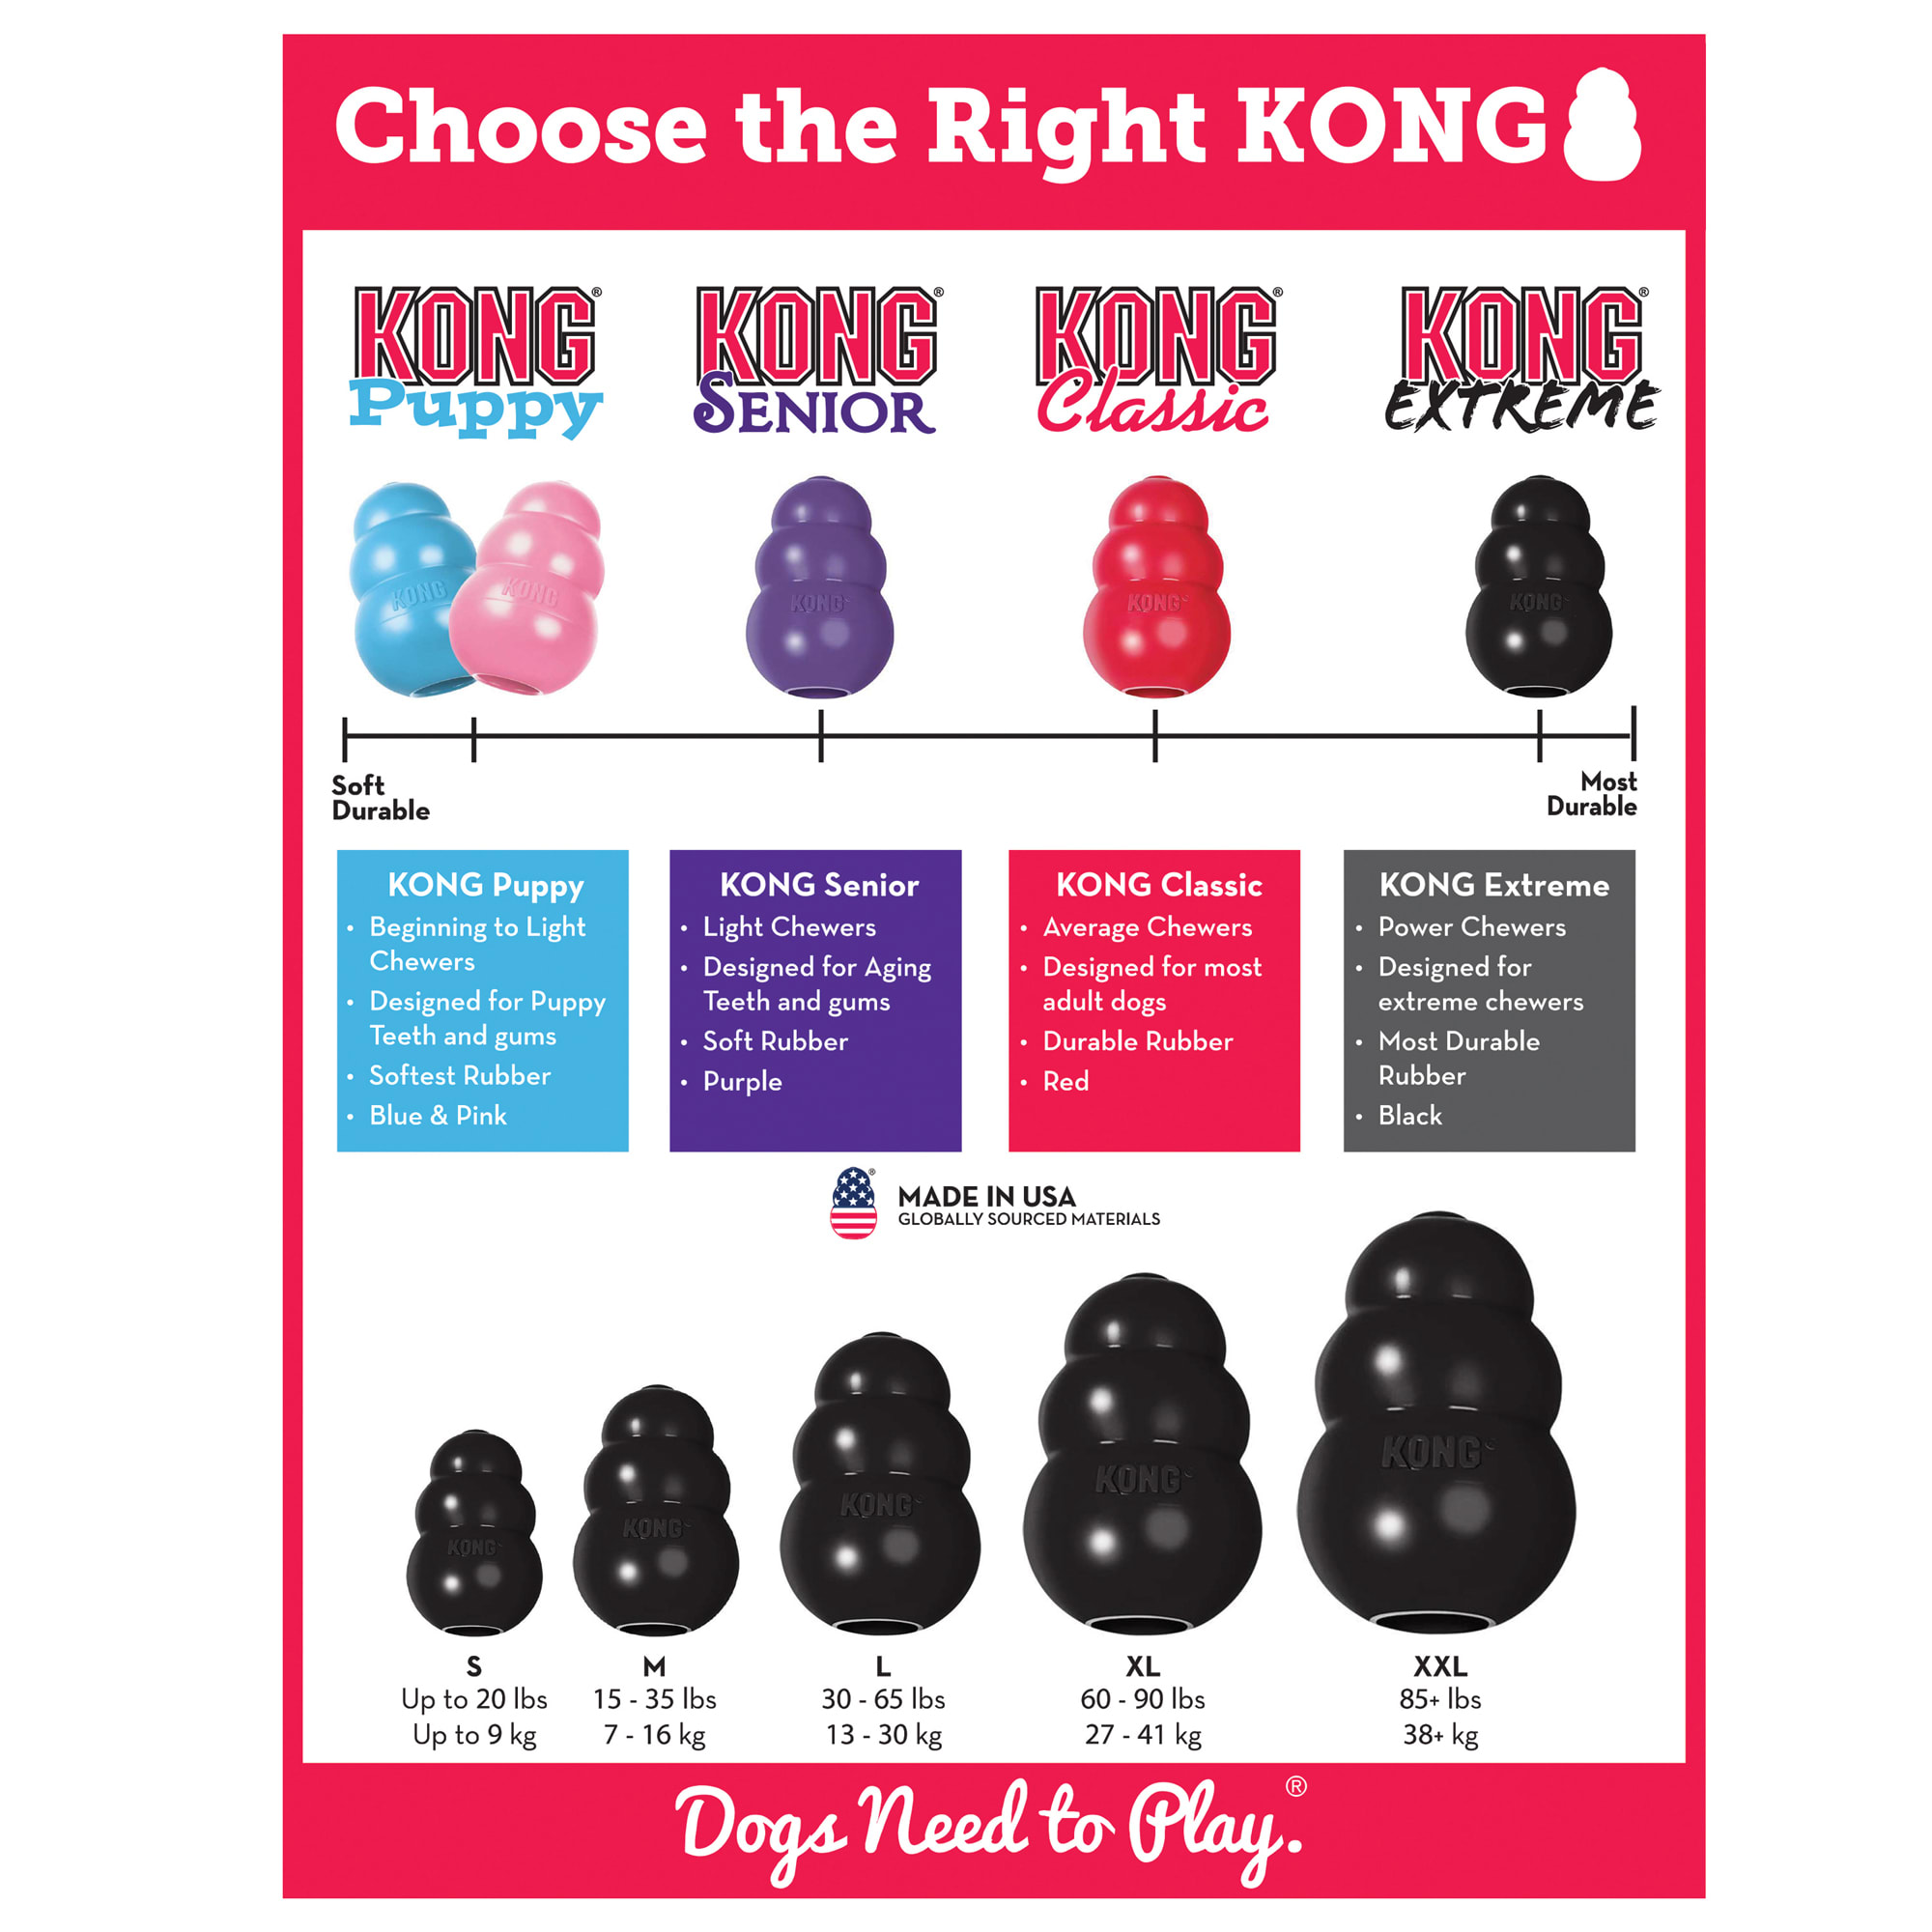 KONG Extreme NEW Black Stuffable Dog Toy for Large and X-Large Breeds